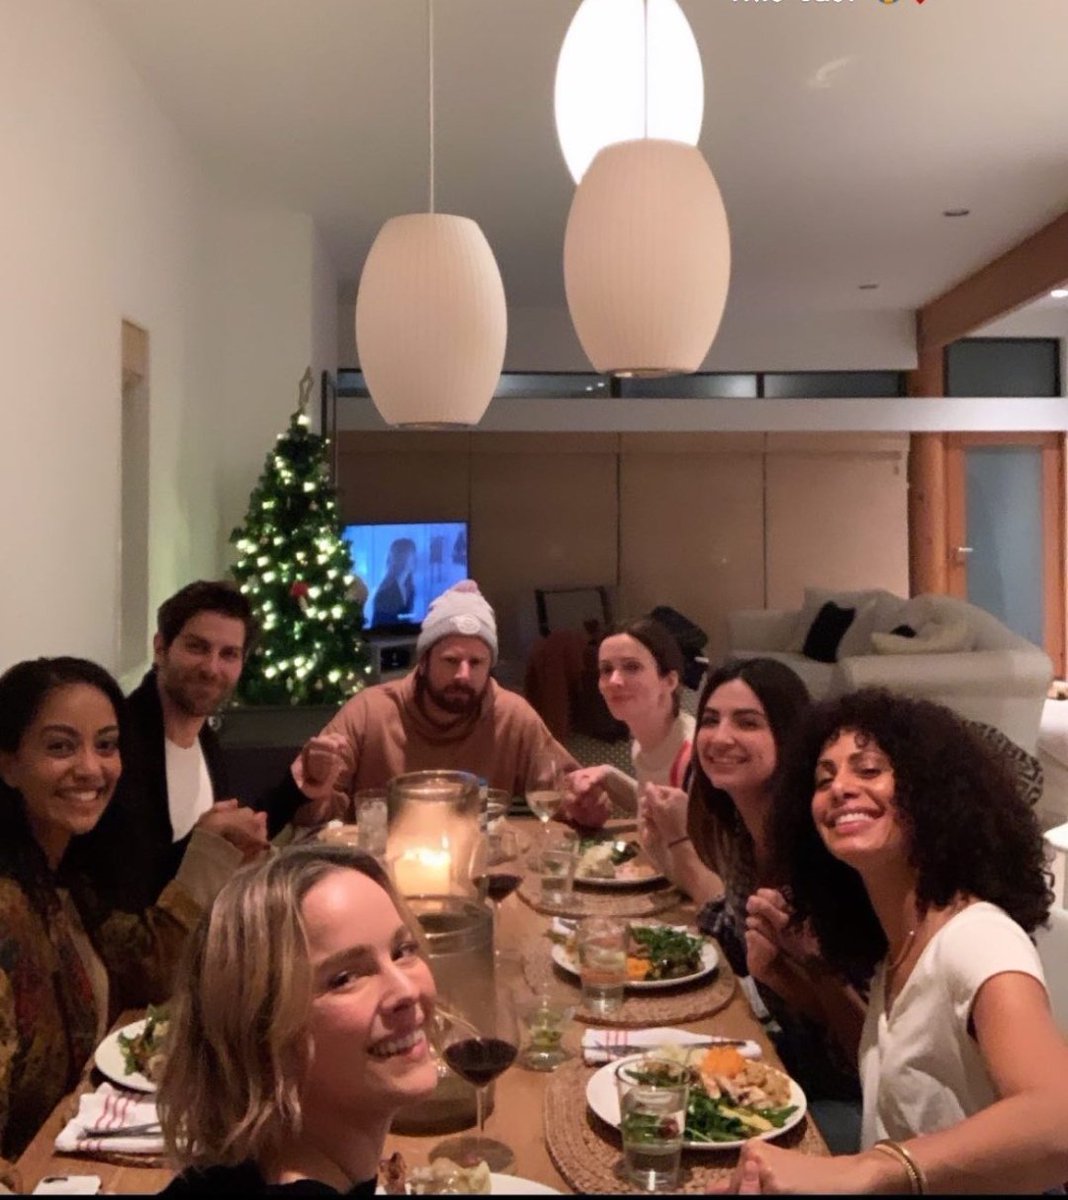 PHOTOS | Floriana with the cast of A Million Little Things in Azie Tesfai's memories for the show finale

[IG: azietesfai]